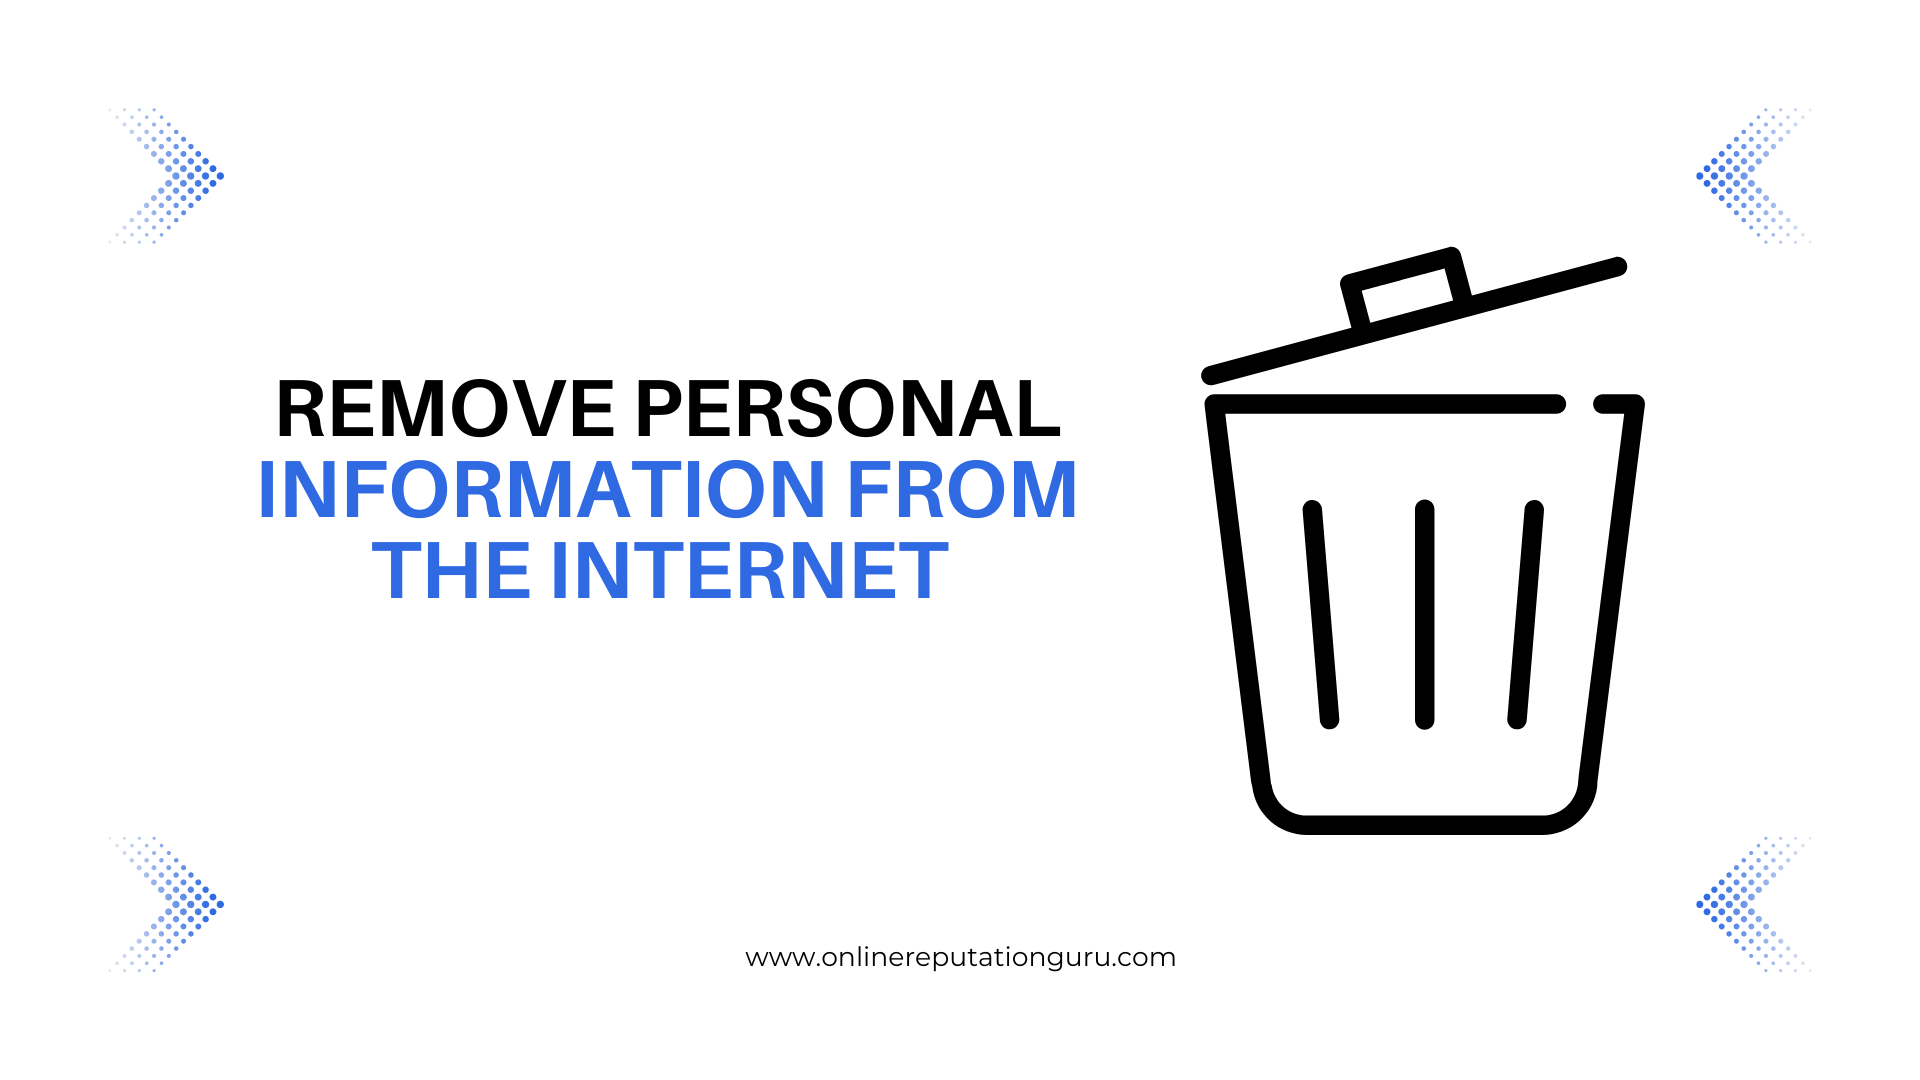 How to Remove Personal Information from the Internet?